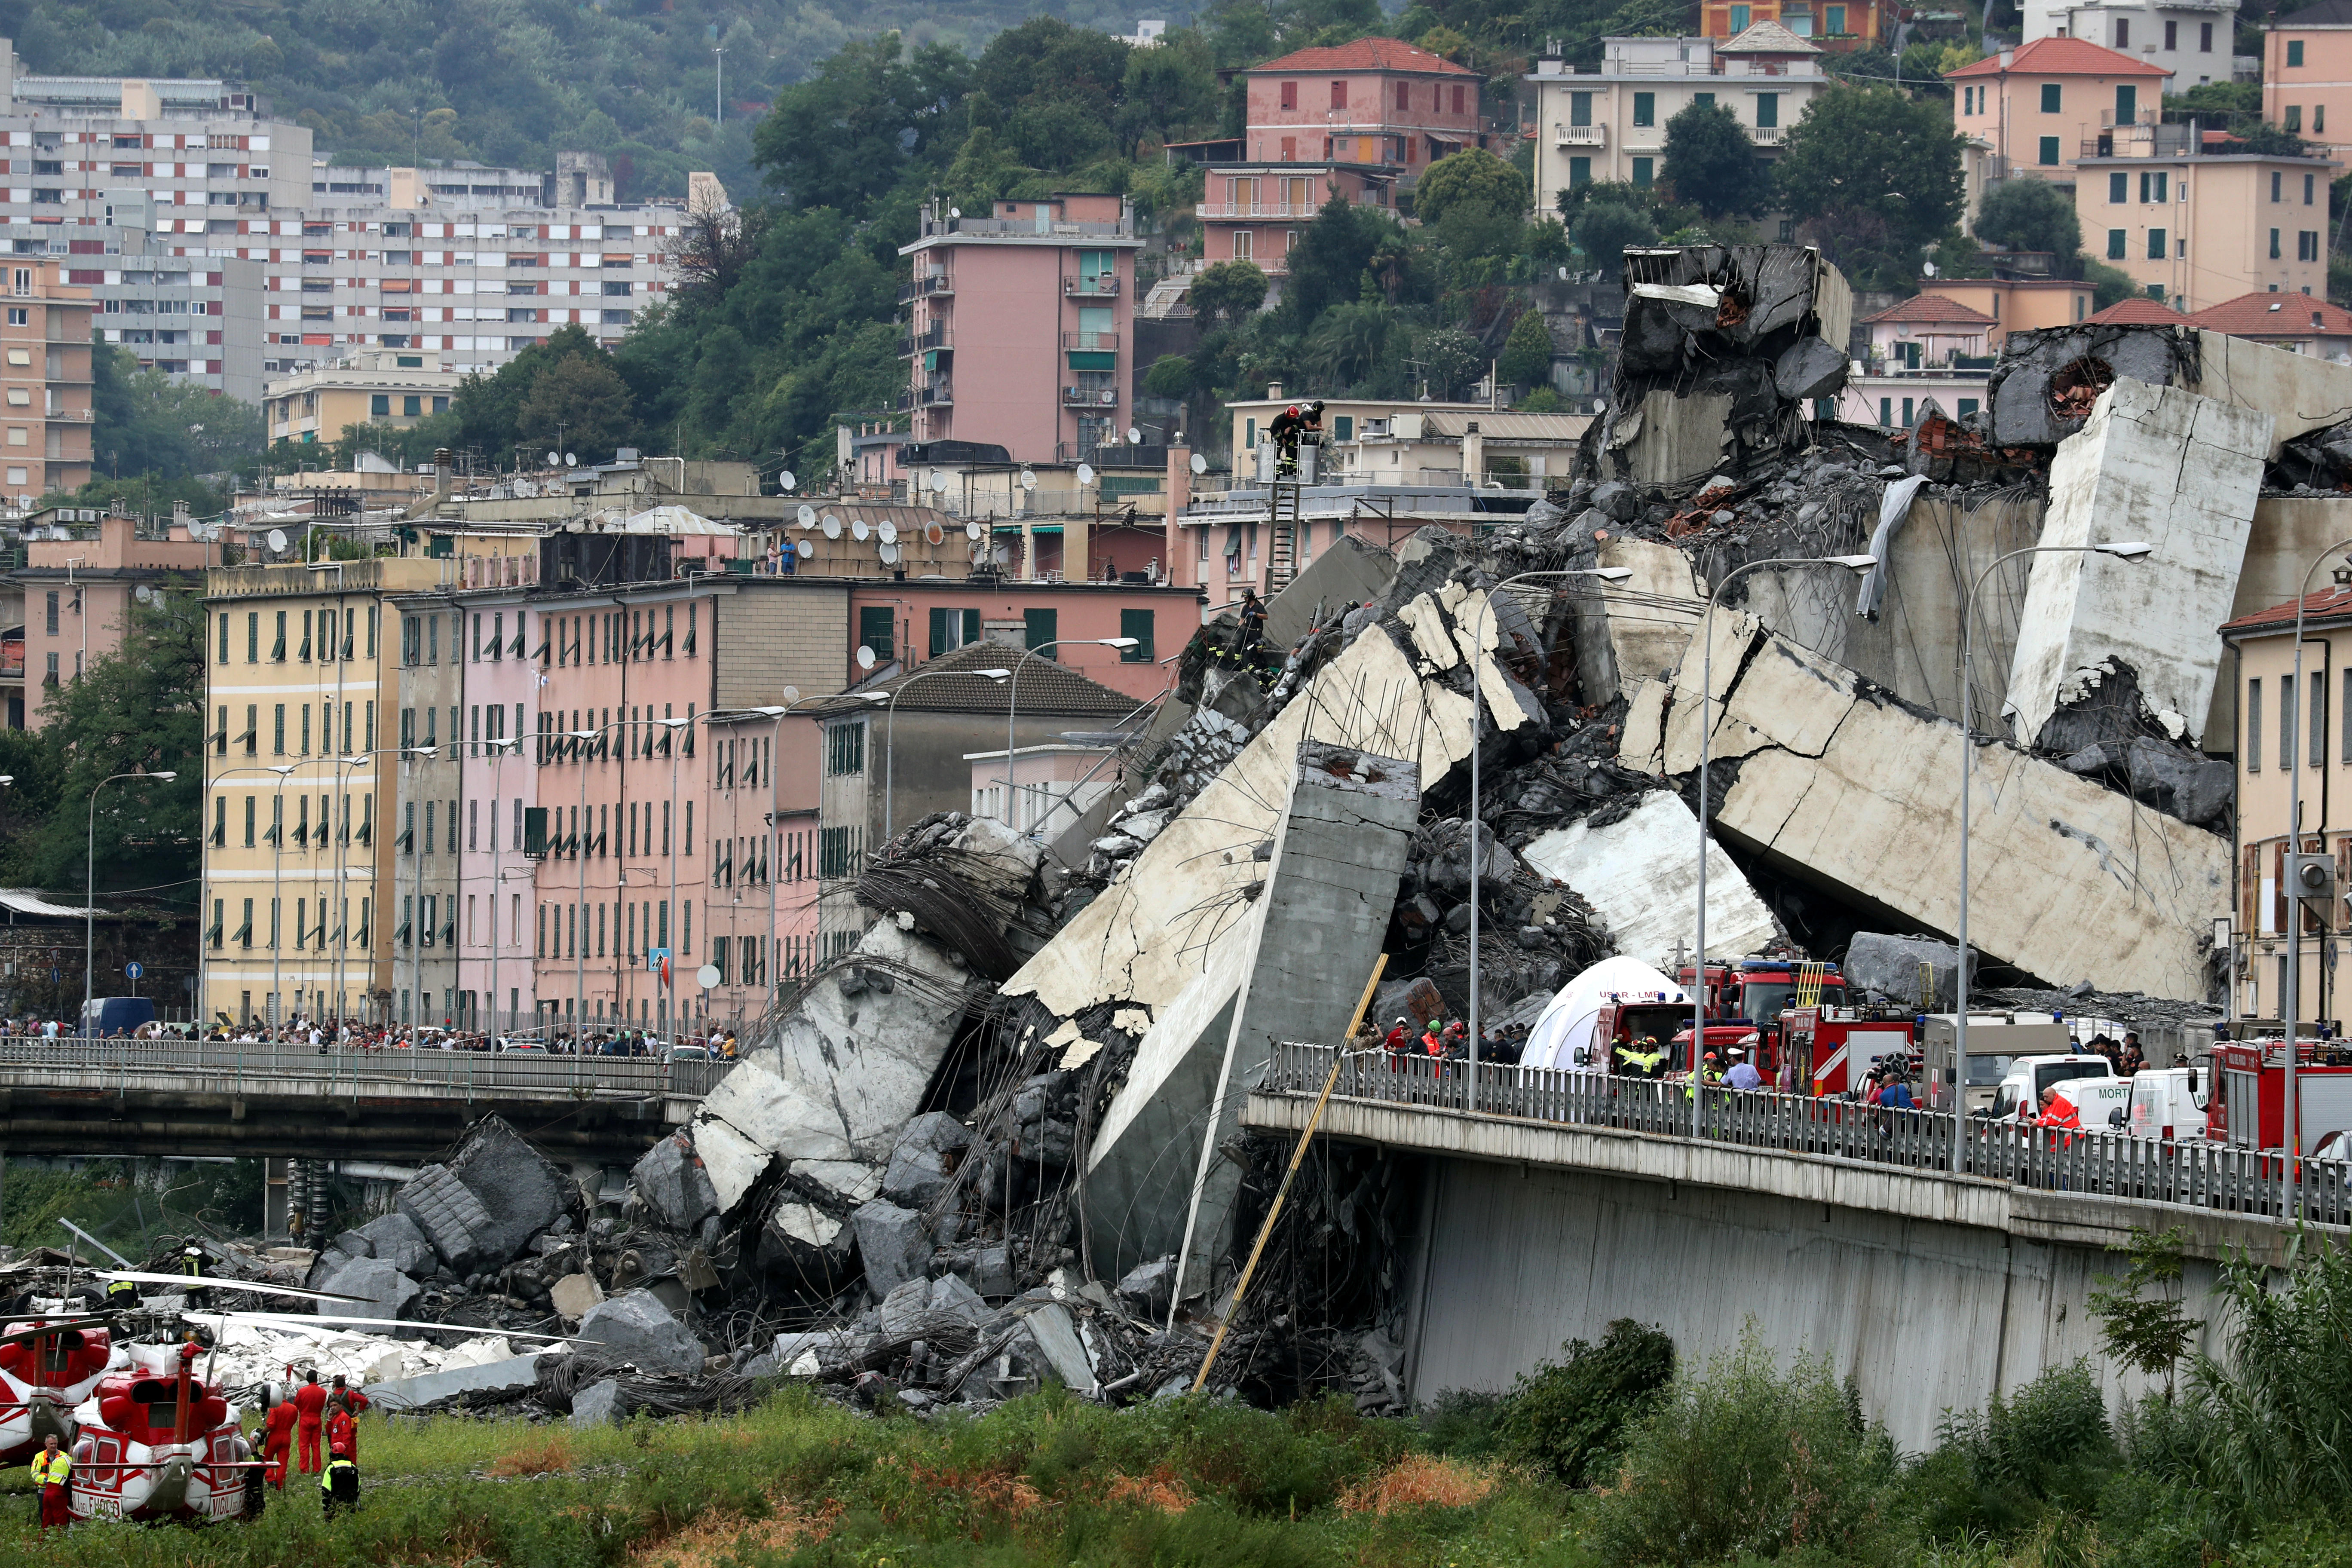 Italy bridge collapse in Genoa leaves at least 26 dead, cars trapped